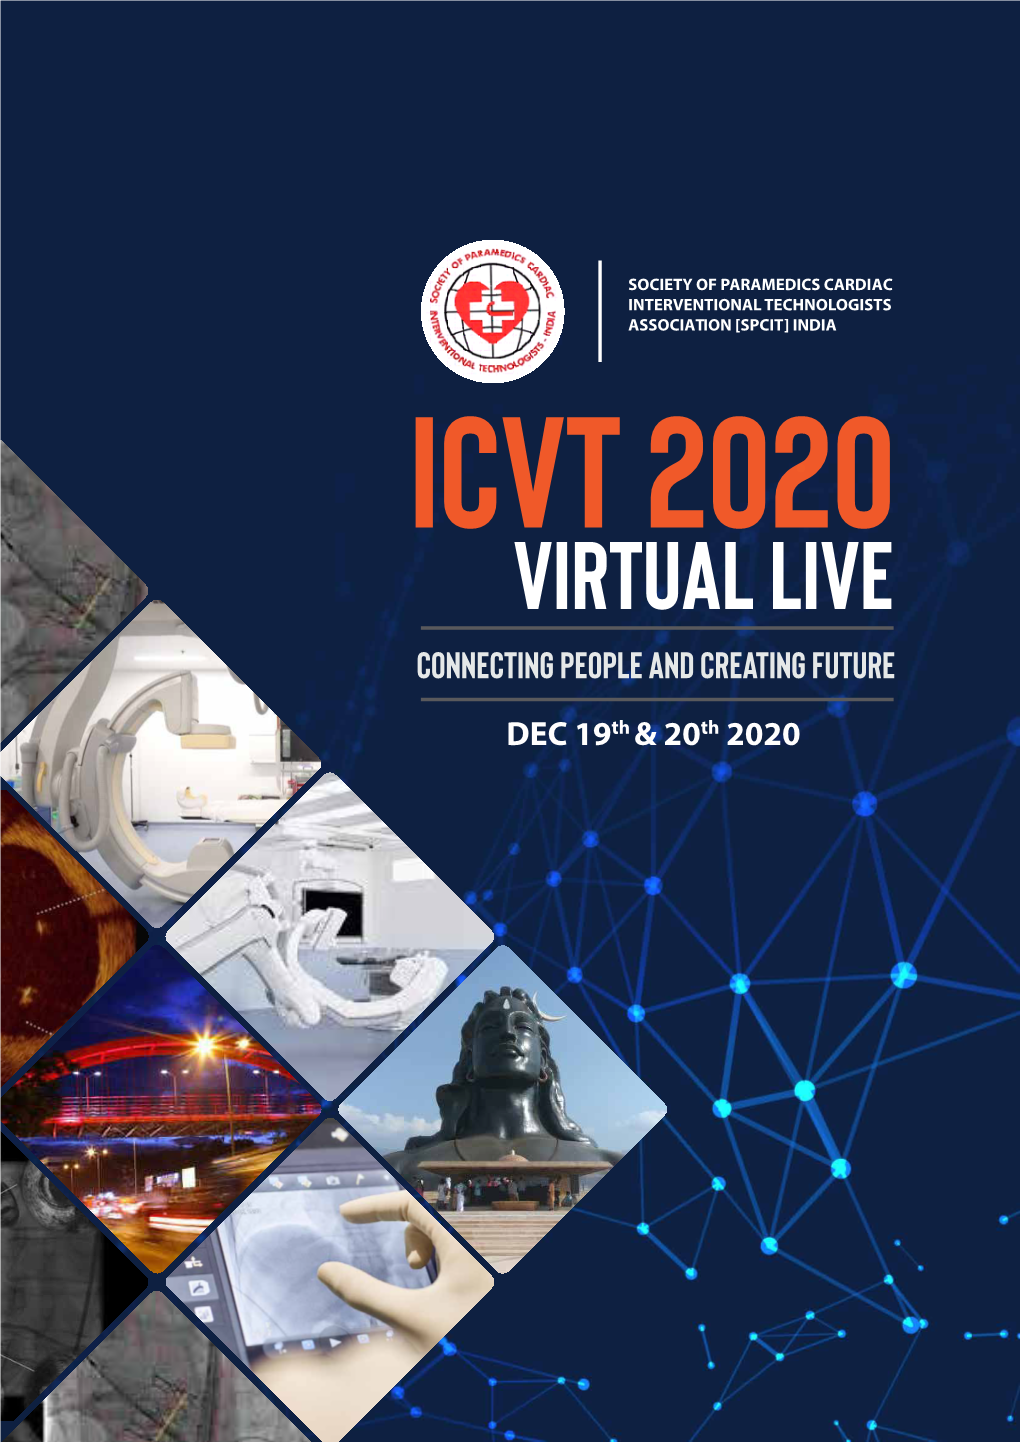 Virtual Live CONNECTING PEOPLE and CREATING FUTURE